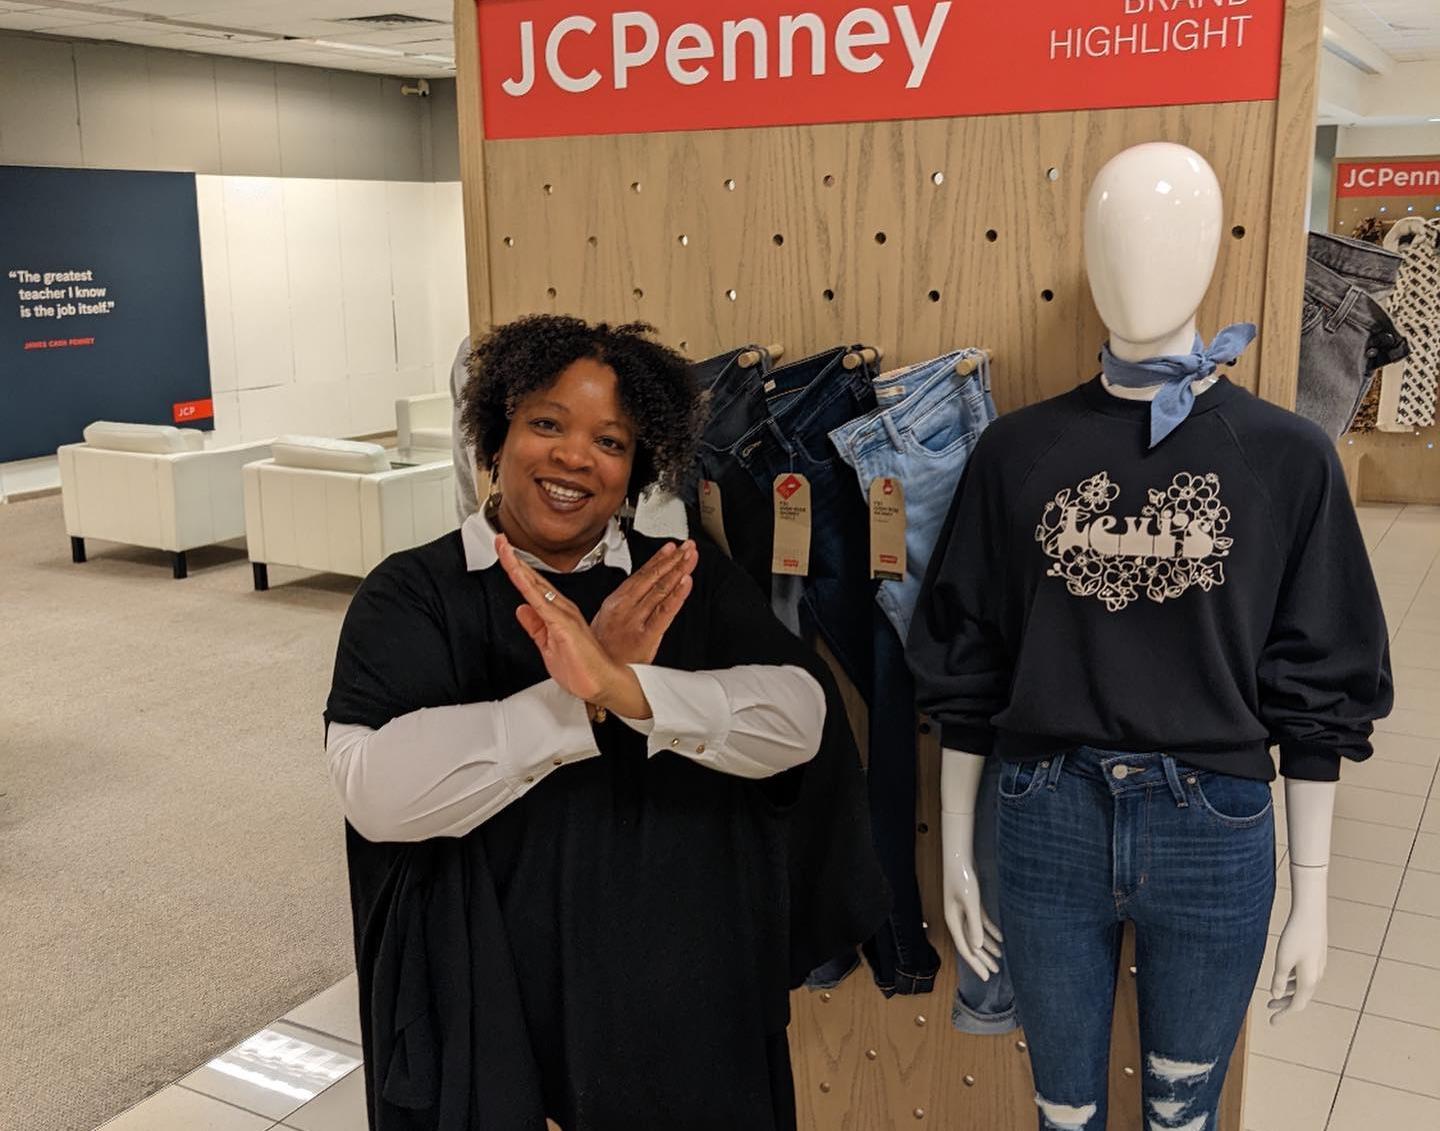 Is JCPenney Going Out of Business? Company Is Down, Not Out Yet